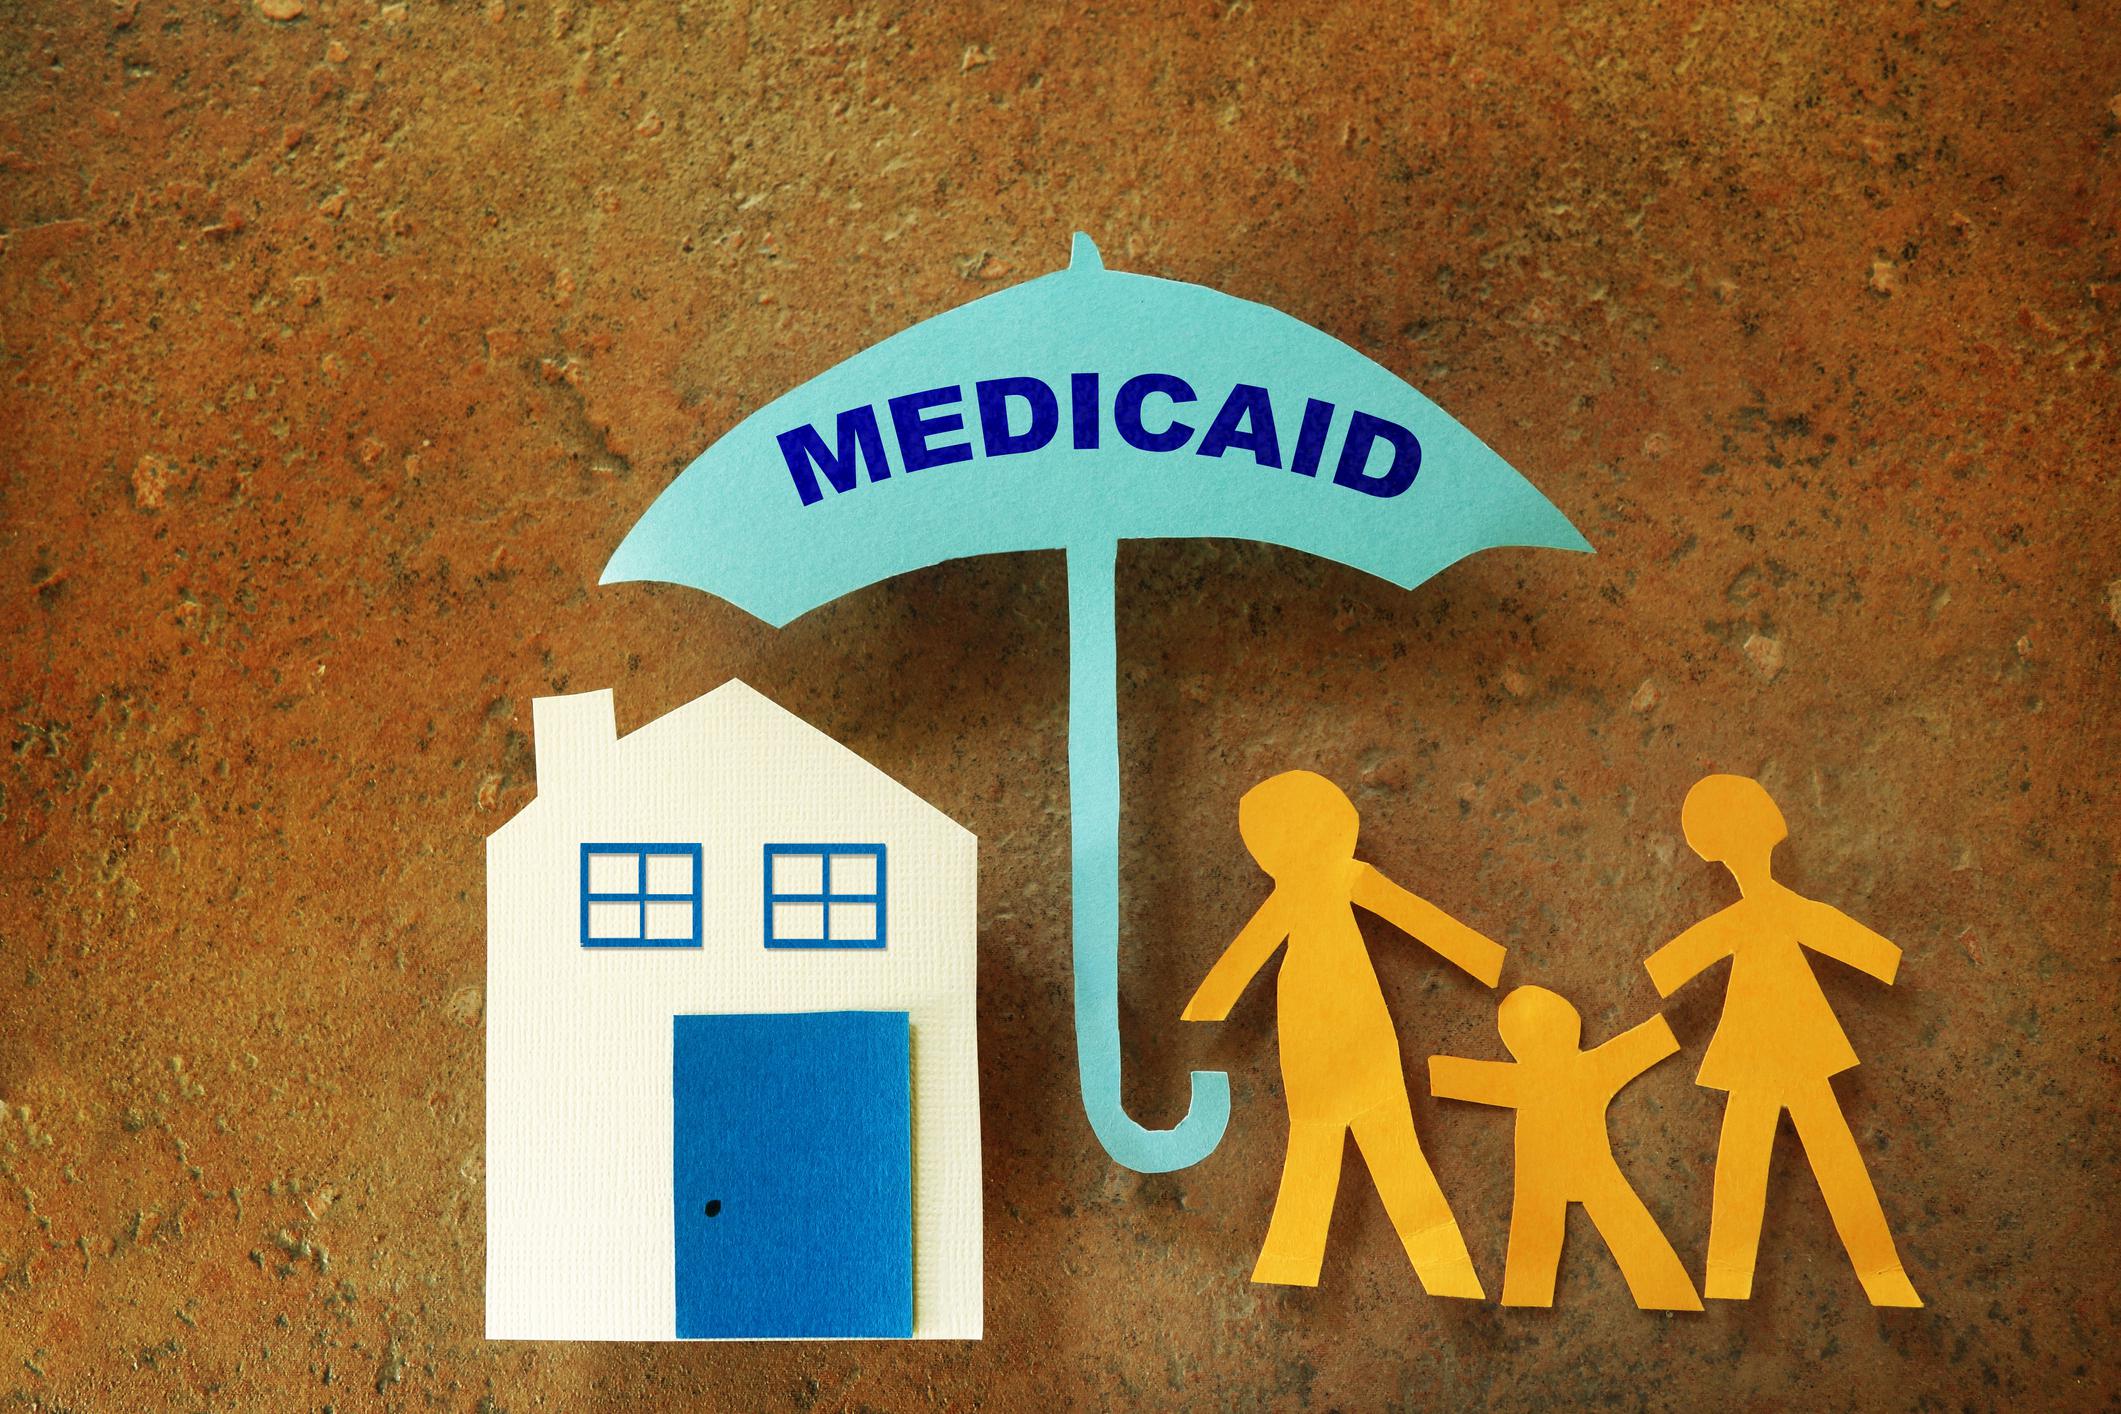 Utah Medicaid: Why advocates say enrollment rate is lower than other states